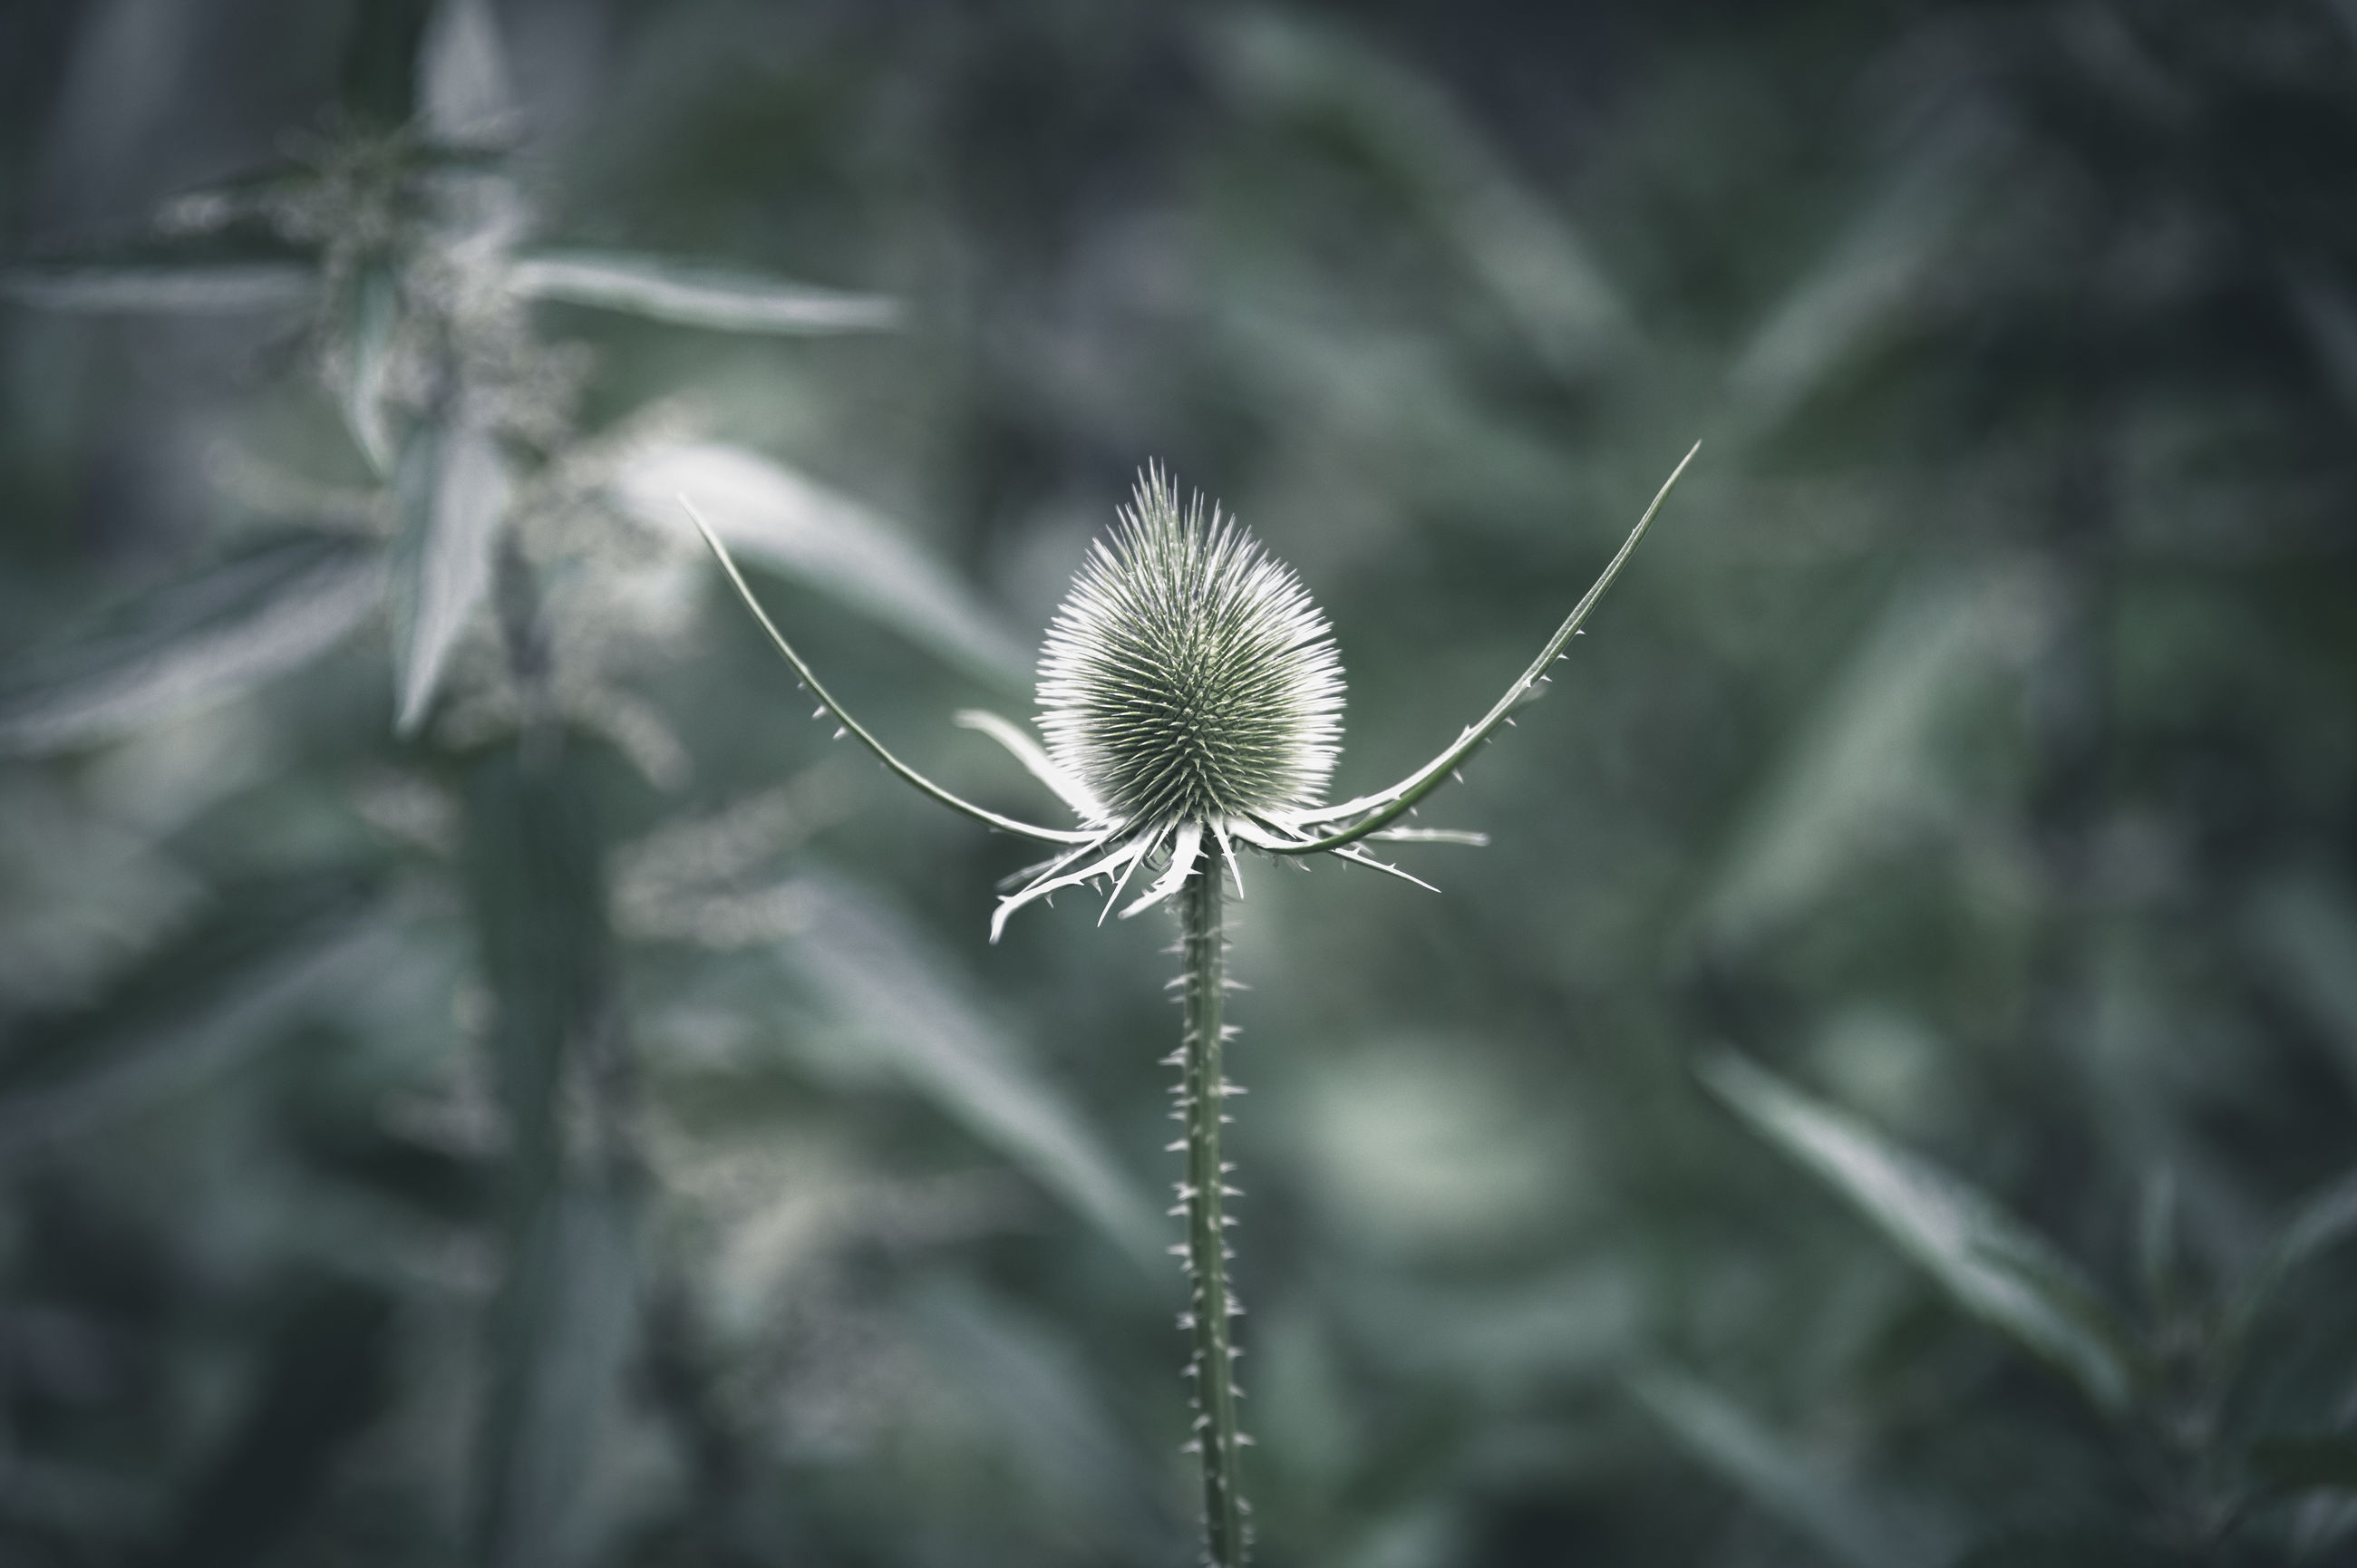 plant, growth, focus on foreground, close-up, beauty in nature, nature, day, flower, no people, fragility, vulnerability, flowering plant, tranquility, outdoors, freshness, plant stem, selective focus, dried plant, green color, dandelion, flower head, dead plant, sepal, spiky, dandelion seed, dried